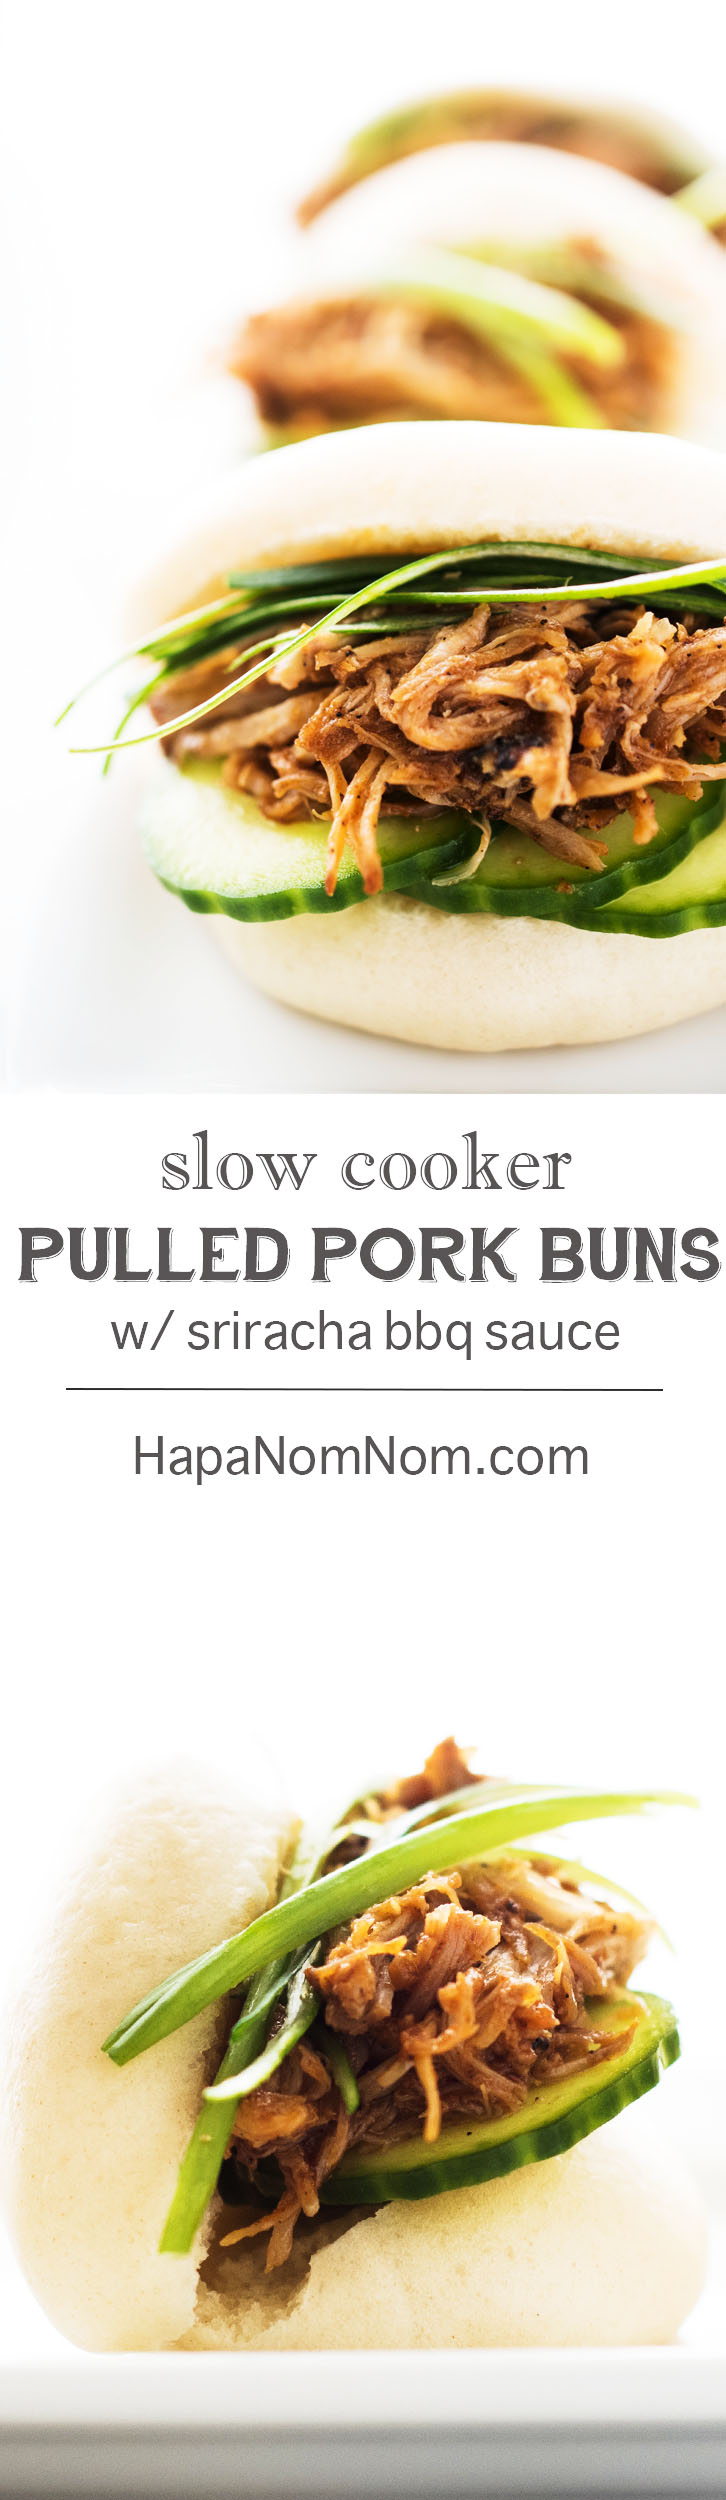 Slow-Cooker-Pulled-Pork-Buns-Pin2